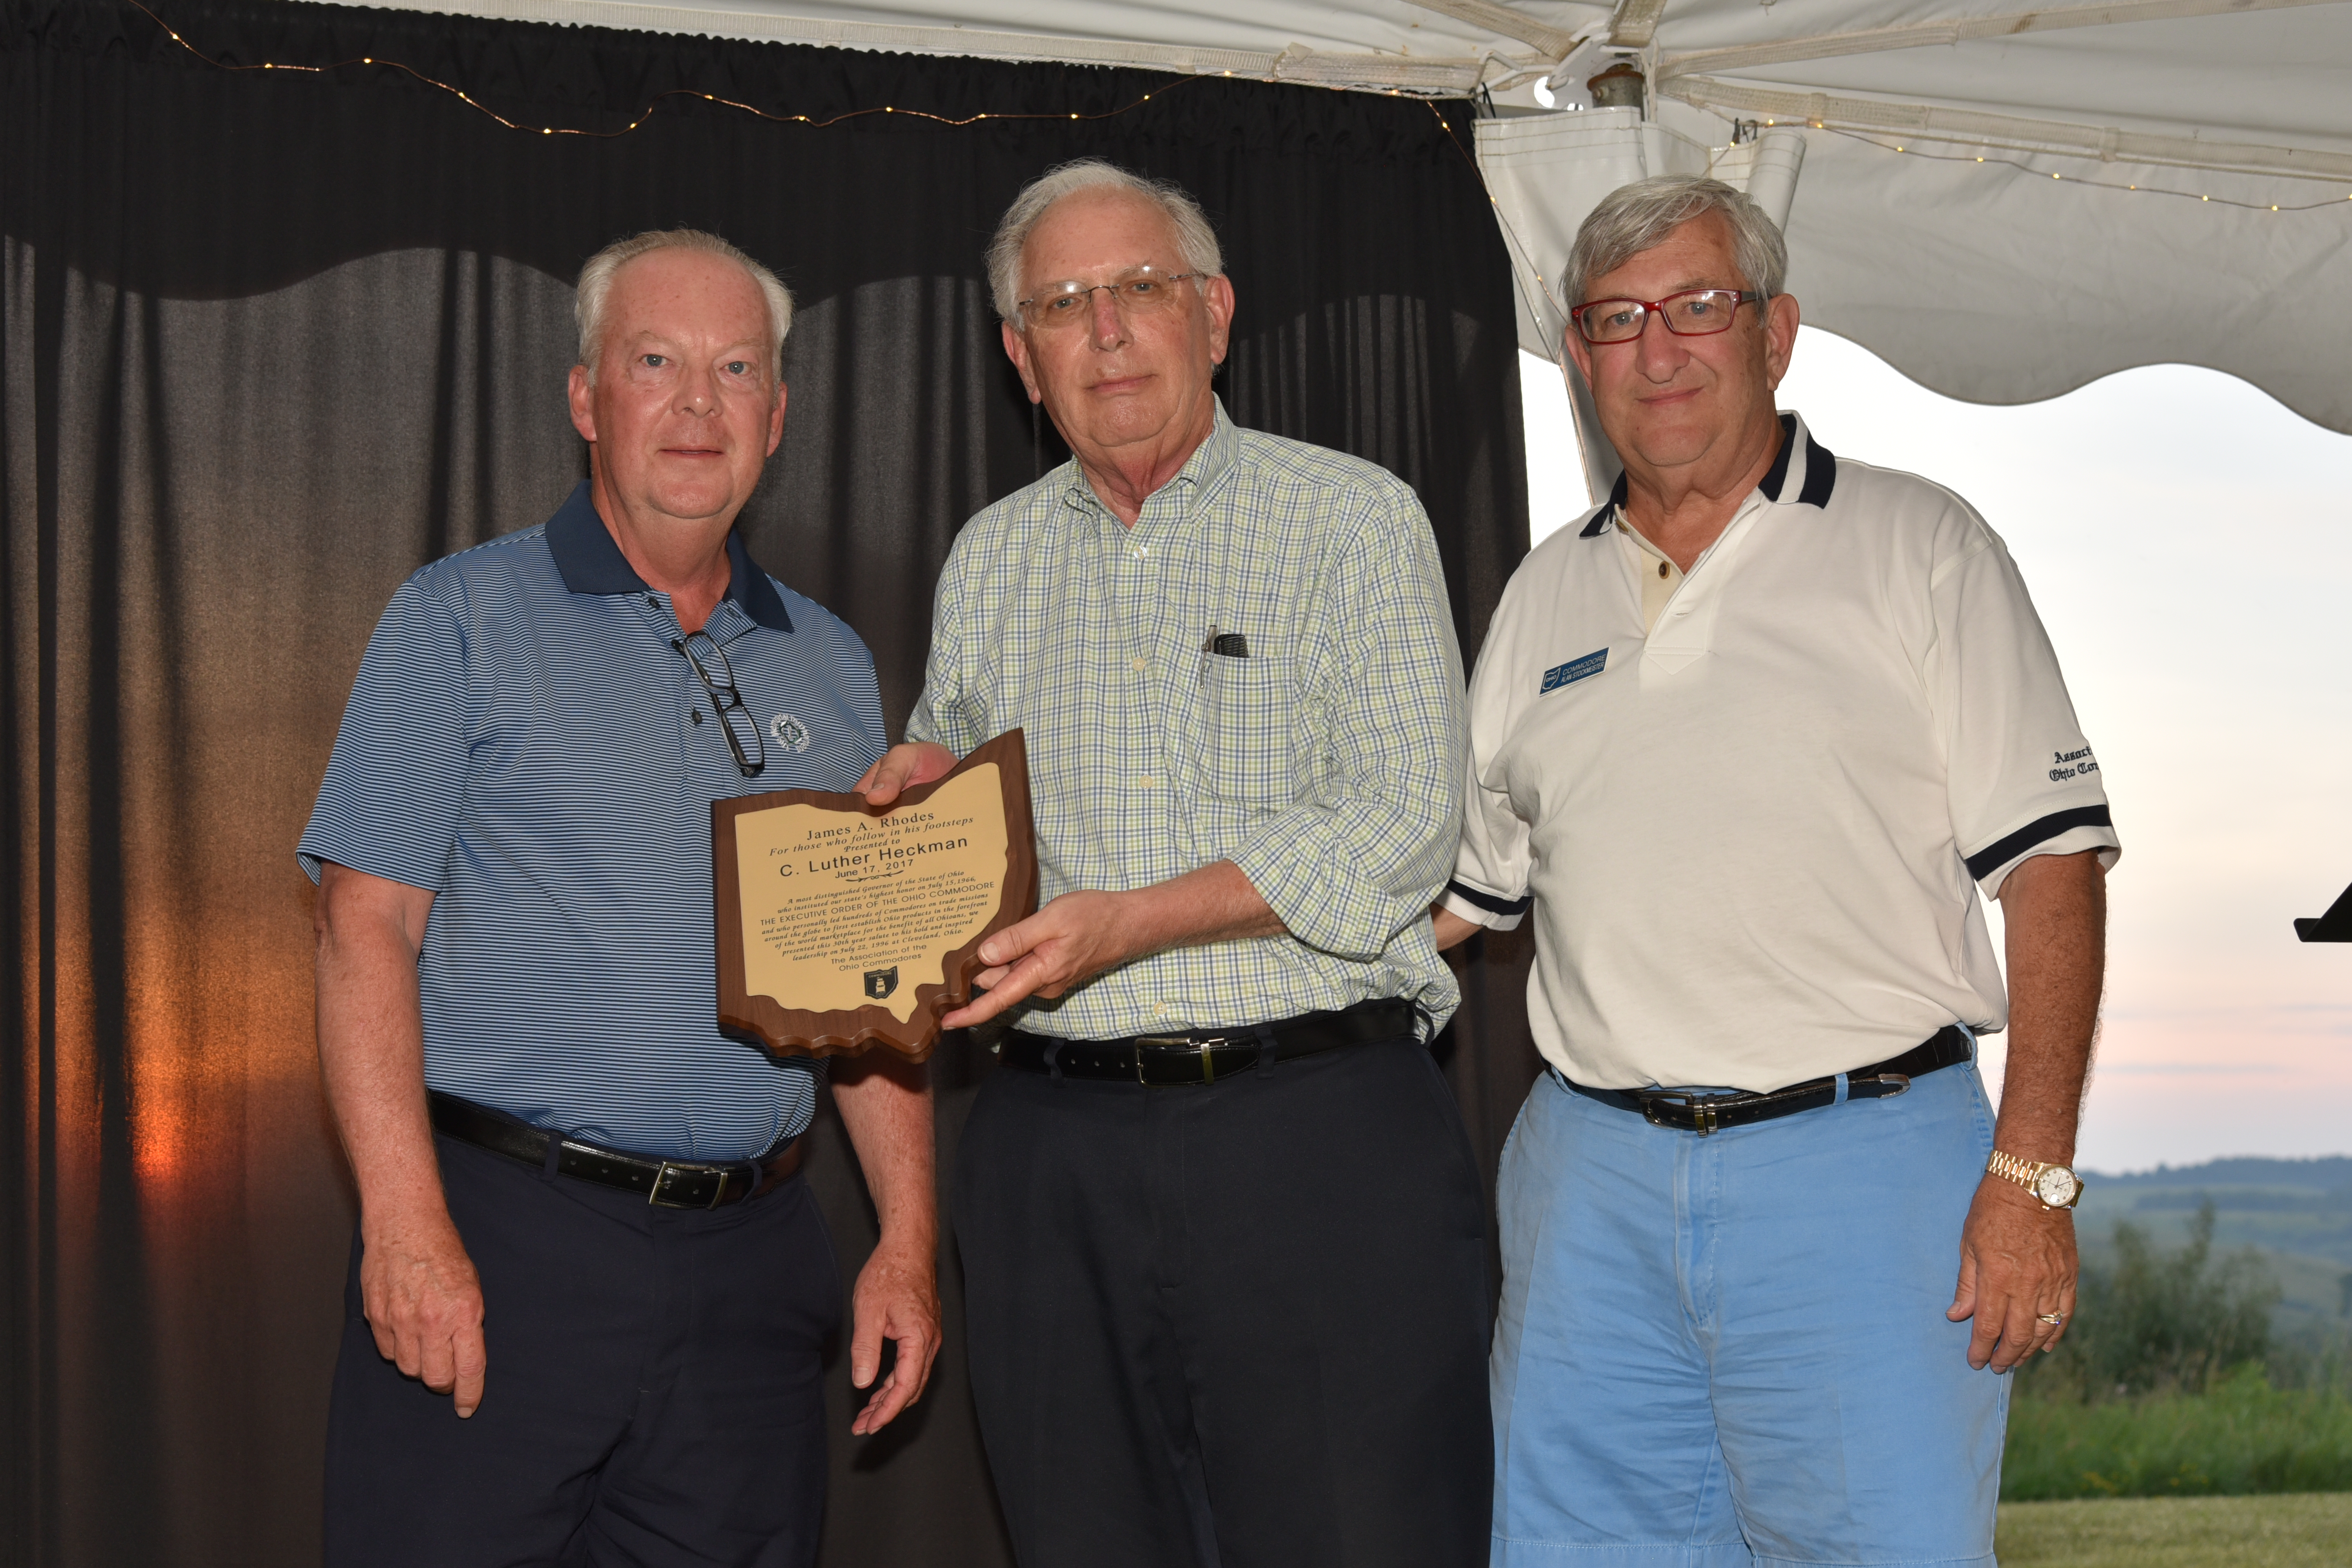 C. Luther Heckman receives James A. Rhodes Award from Steve Landerman and Grand Commodore Alan Stockmeister